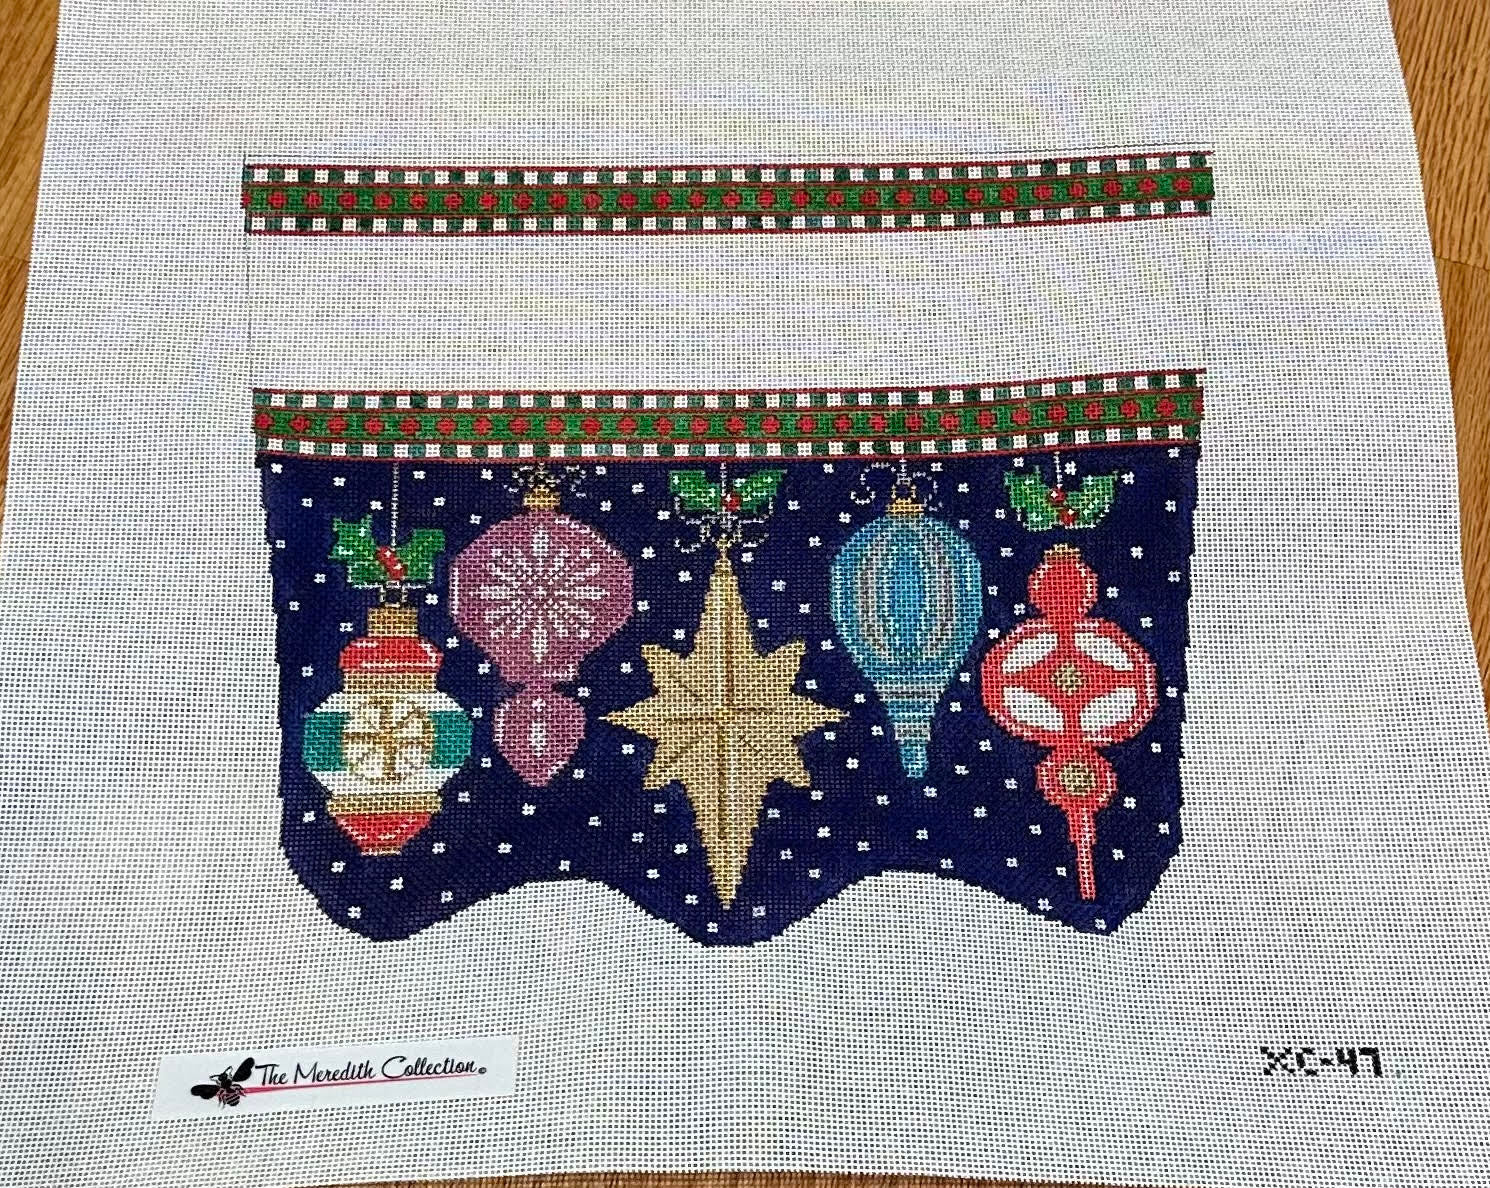 Meredith Collection XC-47 Vintage Ornaments Stocking Topper